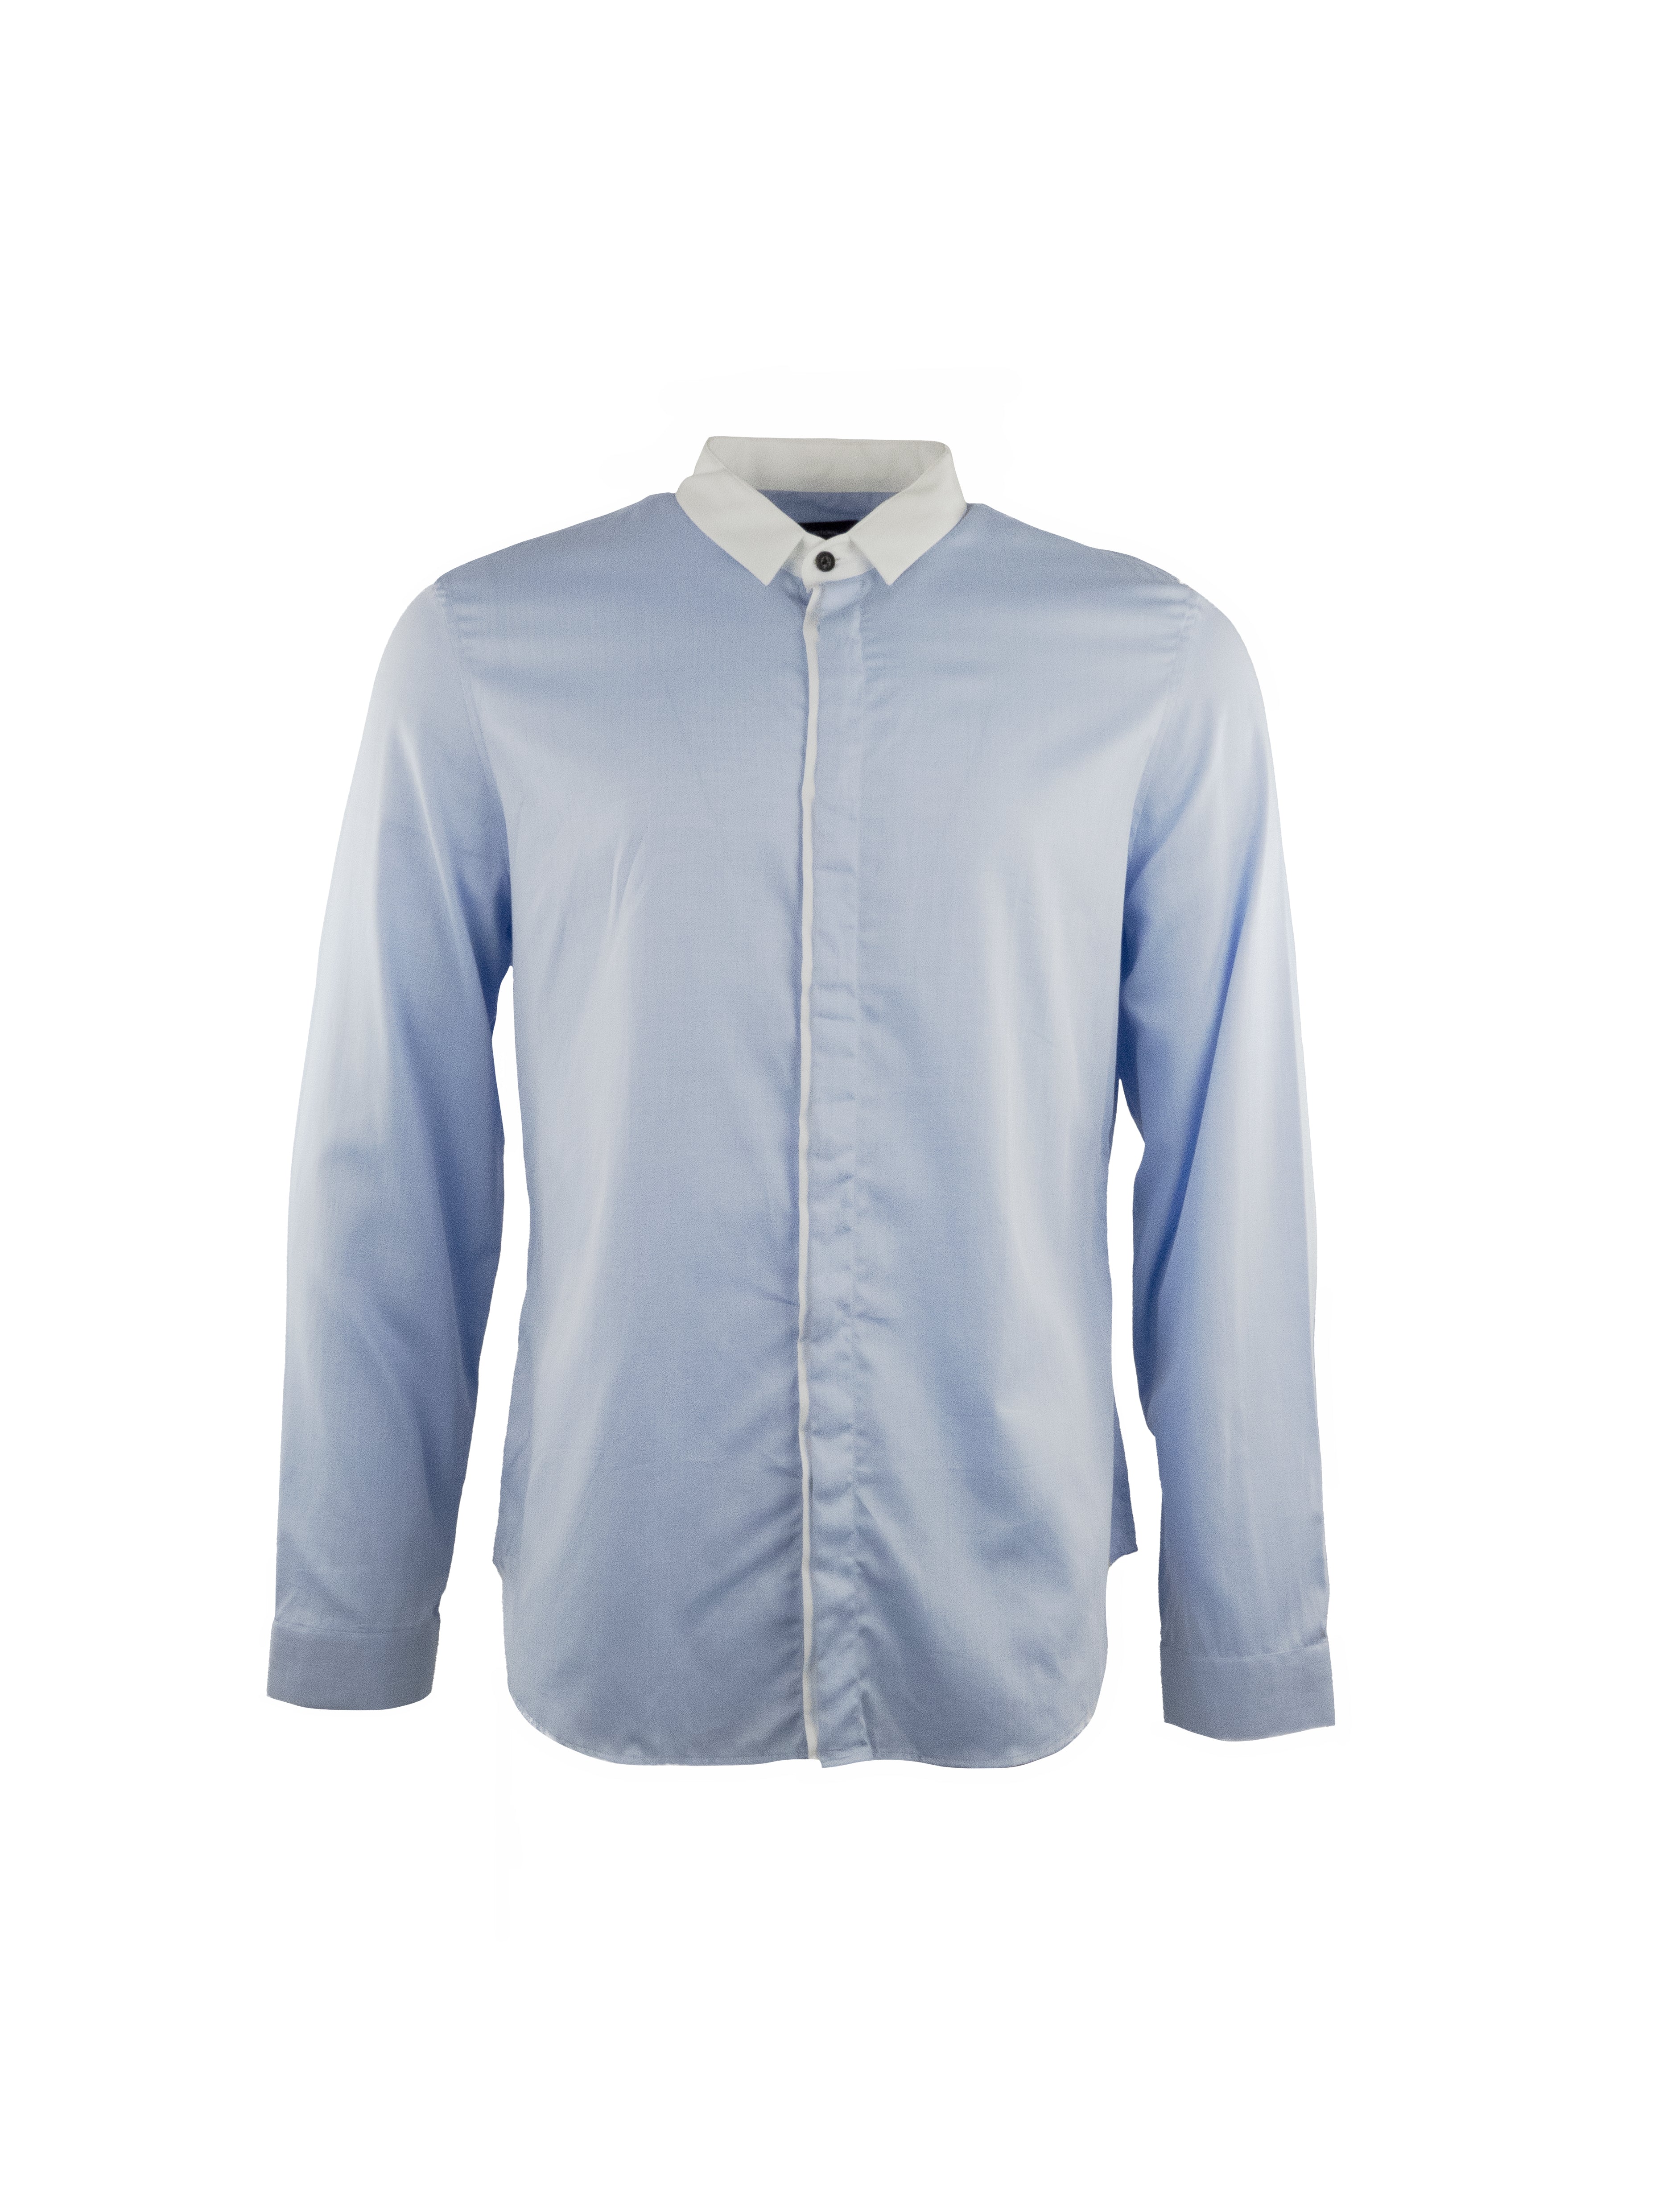 BLUE AND WHITE COLLARED SHIRT